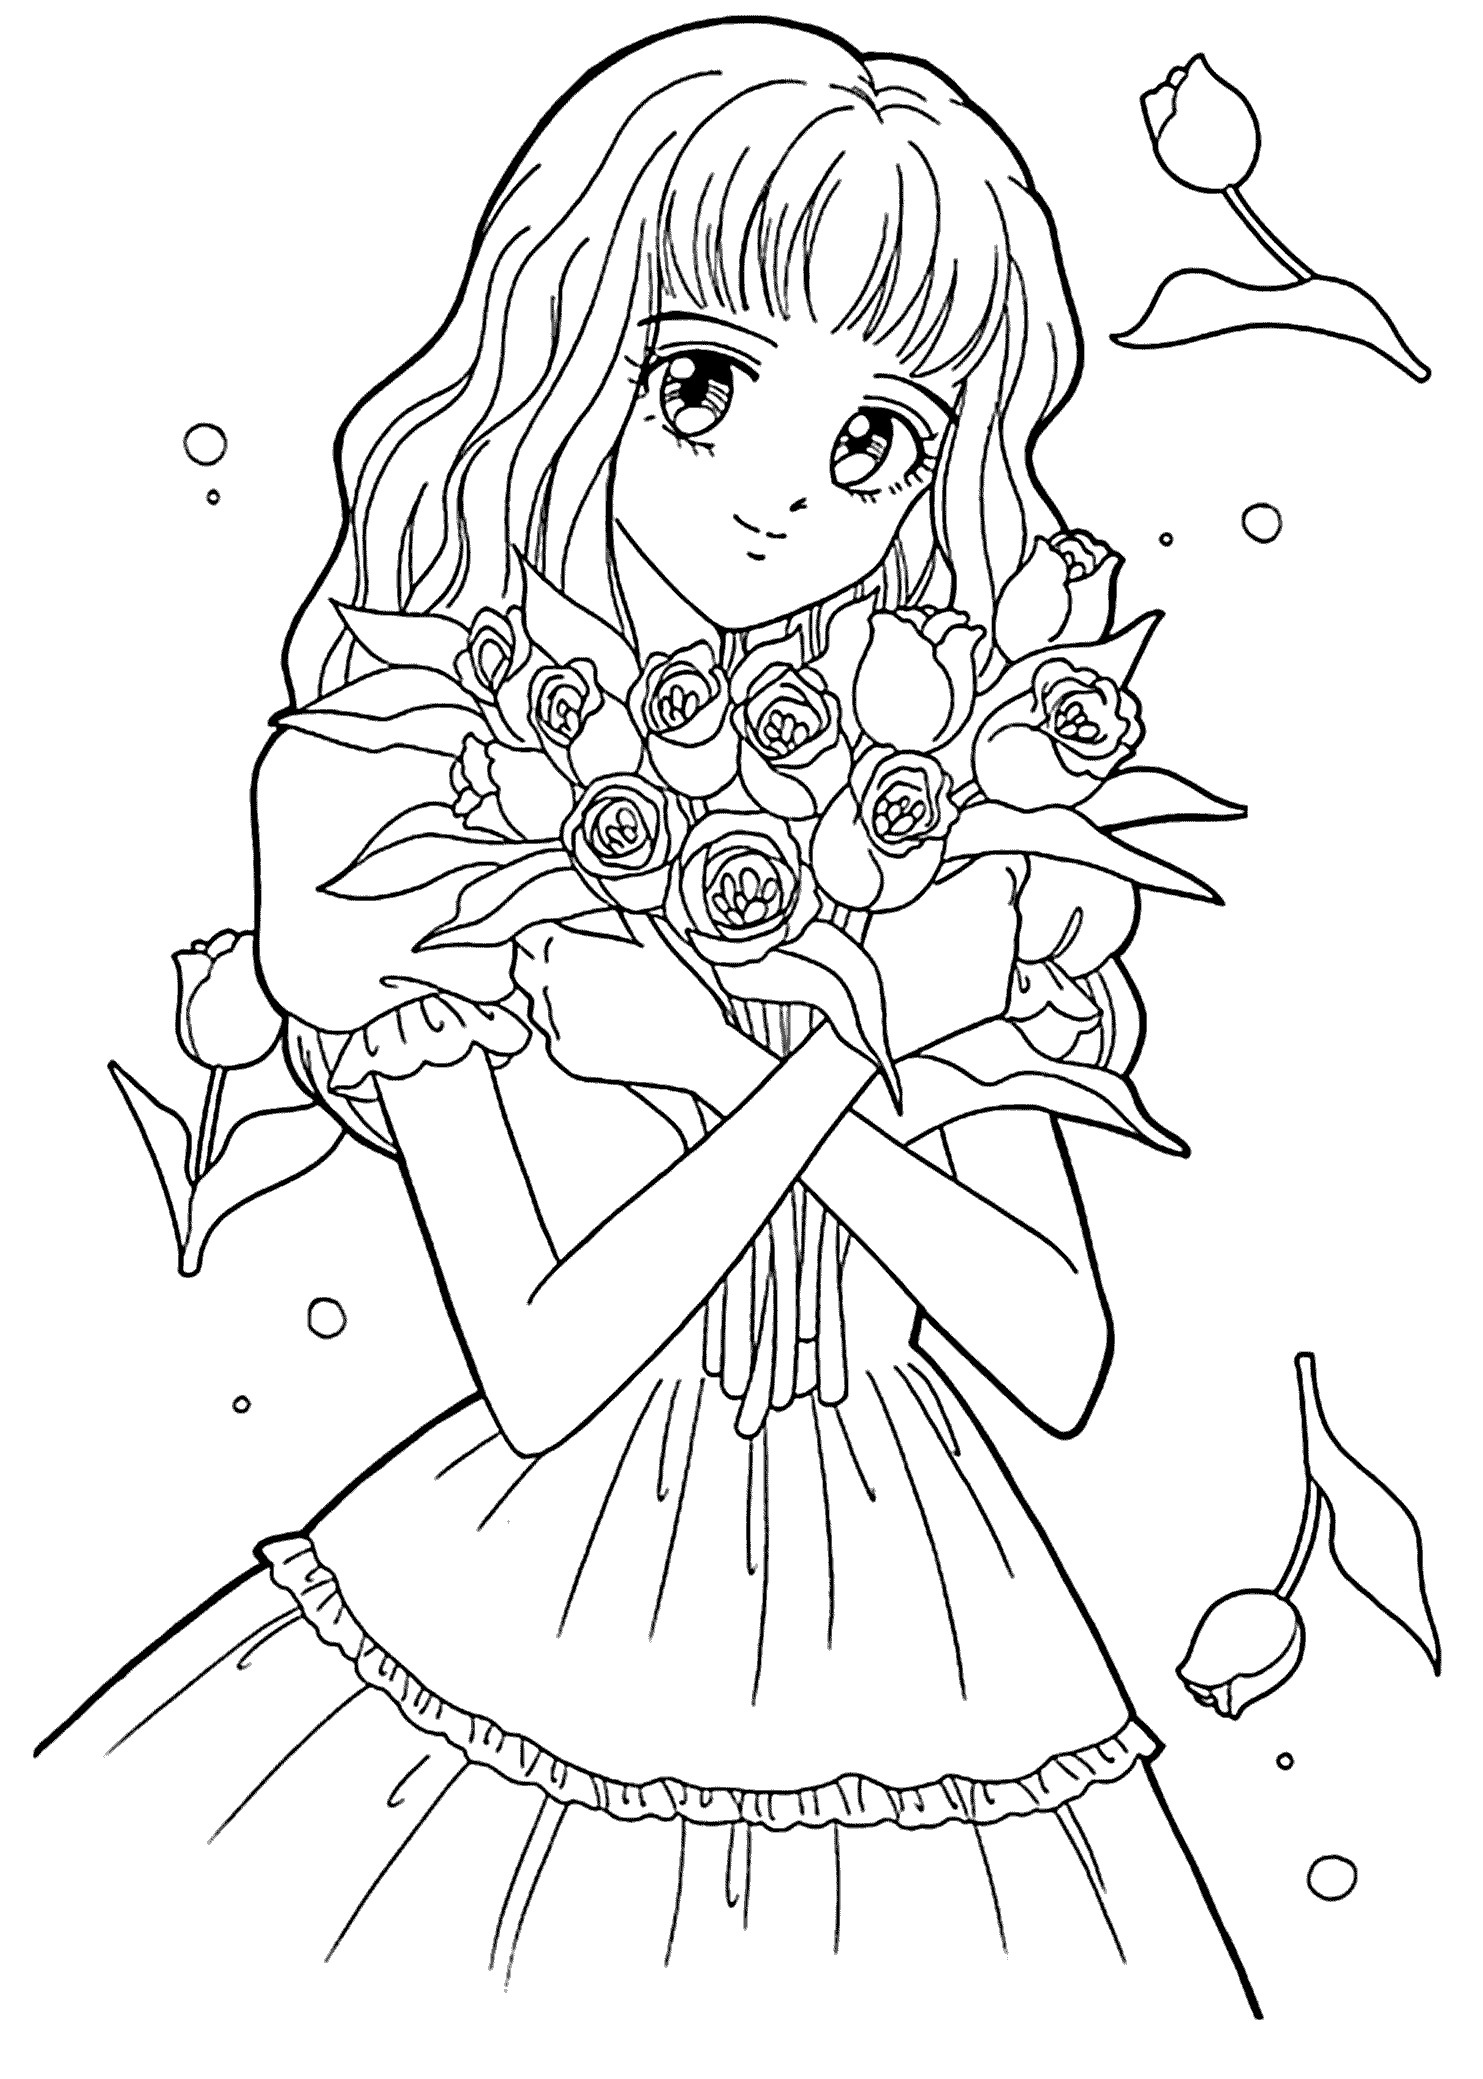 Coloring Pages To Print For Girls
 Best Free Printable Coloring Pages for Kids and Teens